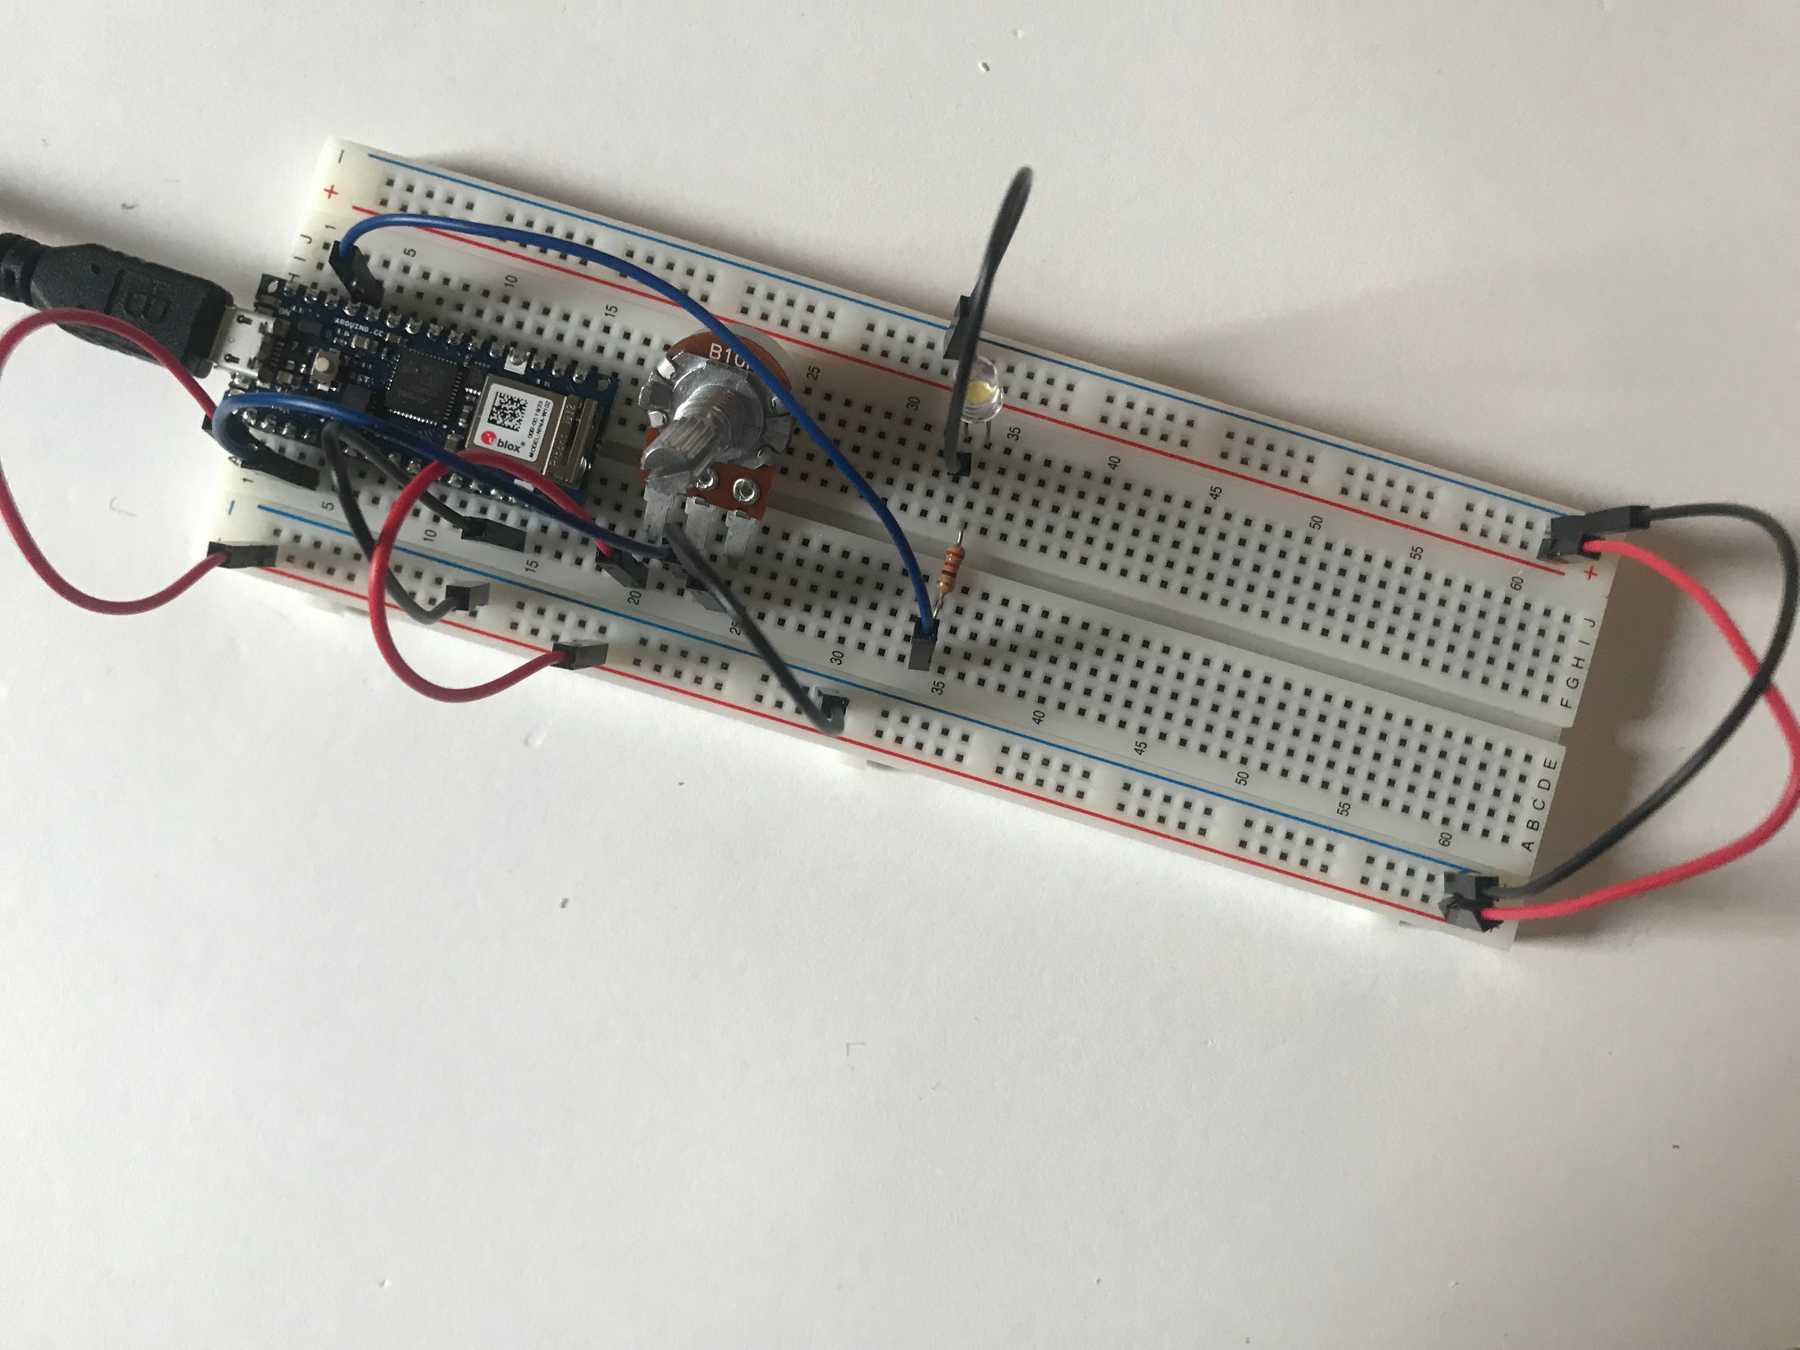 The potentiometer and LED connected to the Arduino